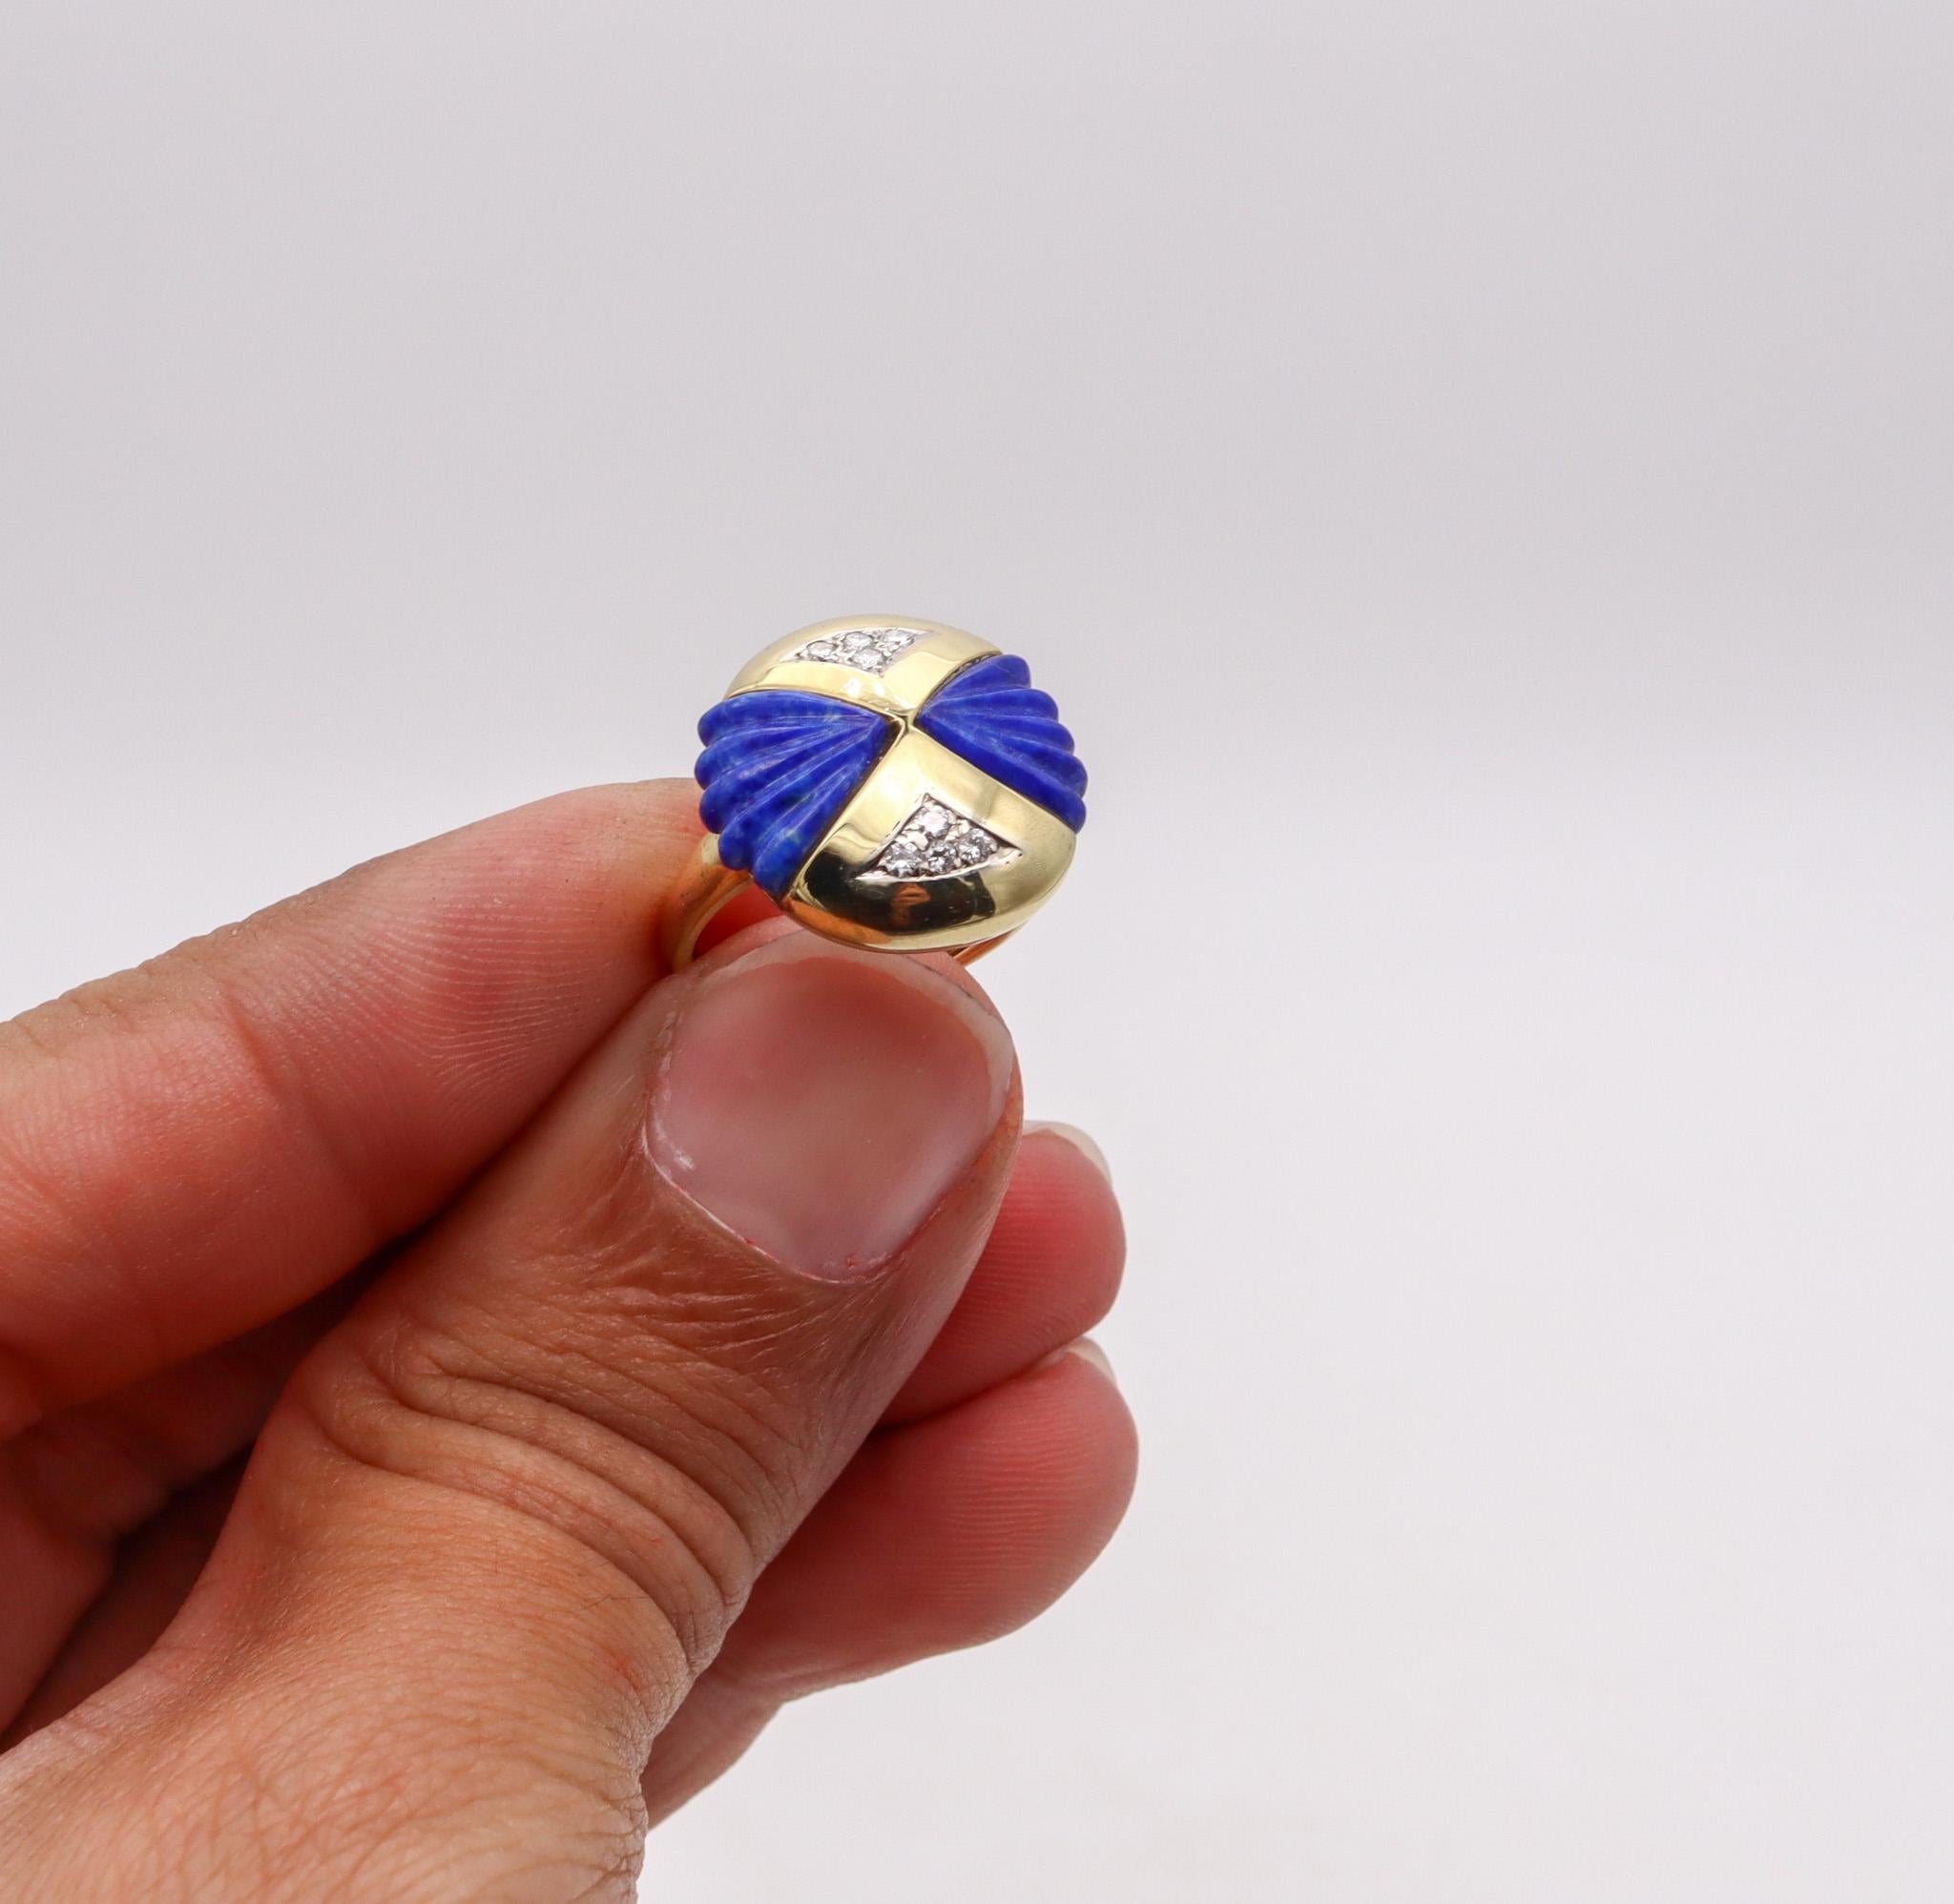 Women's Modernist Sculptural Ring In 18Kt Yellow Gold With 3.24 Ctw Diamonds And Lapis For Sale